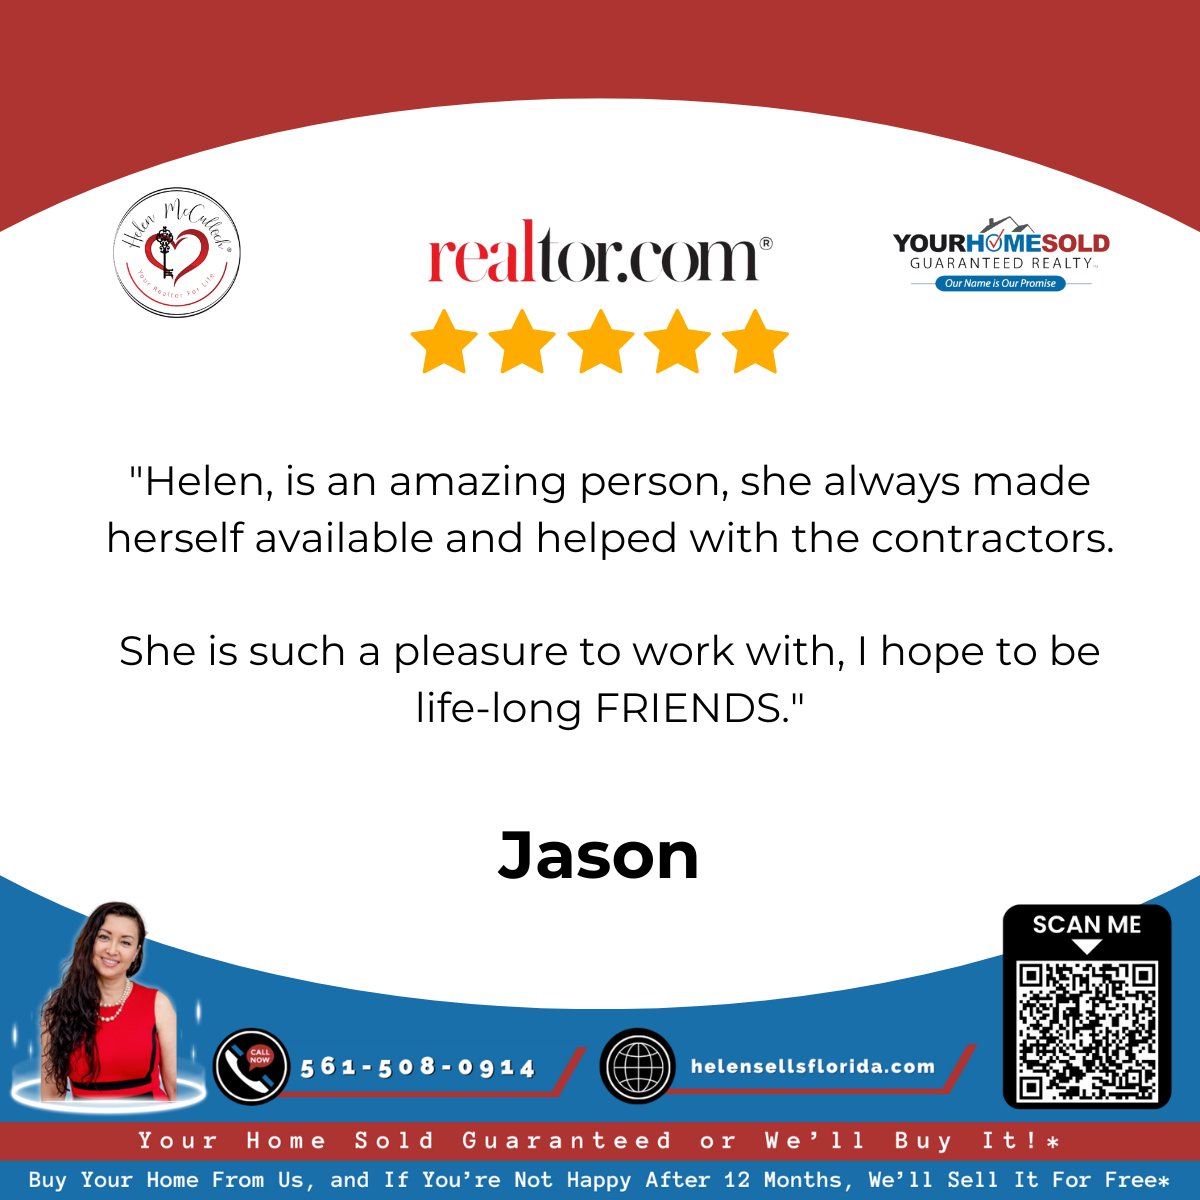 A Pleasure To Work With!

Call 📞561-508-0914 or Click👉 bit.ly/3S9VQp7 for your real estate needs!

#Realtor #RealtorFL #RealEstateFlorida #Reviews #RealEstateFL #RealEstateAgent #RealEstateAgentFL #FloridaRealtor